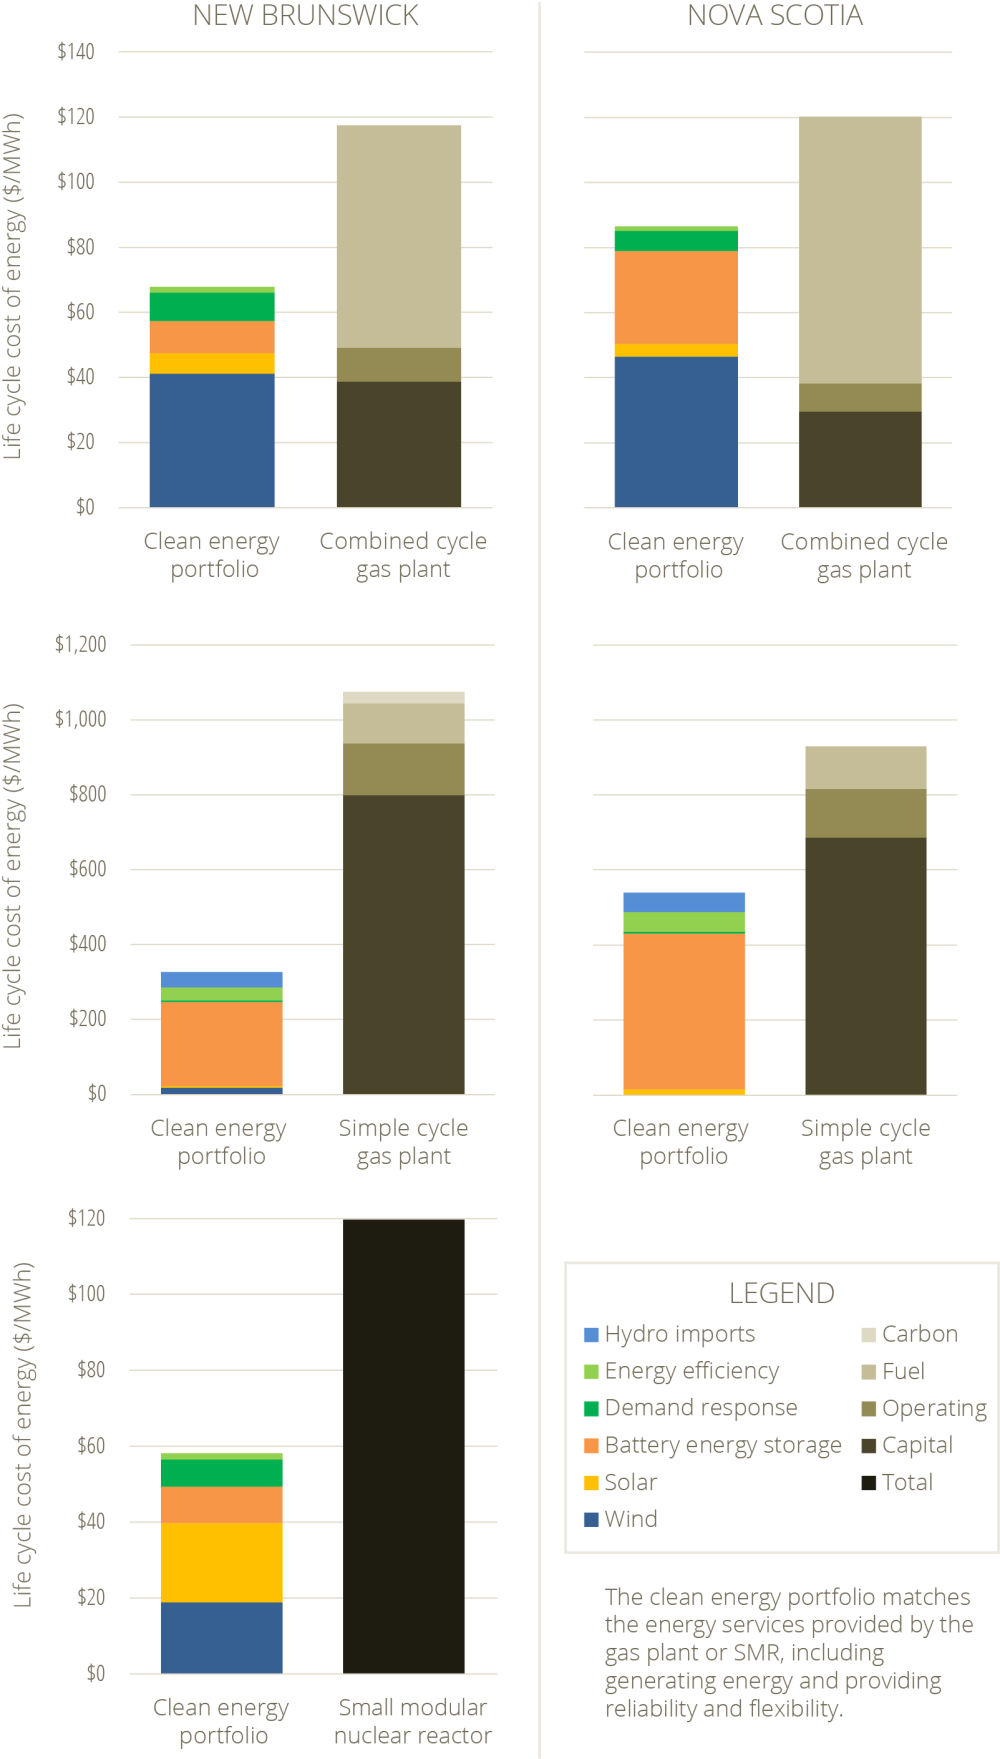 Cost of electricity generation from clean energy portfolios